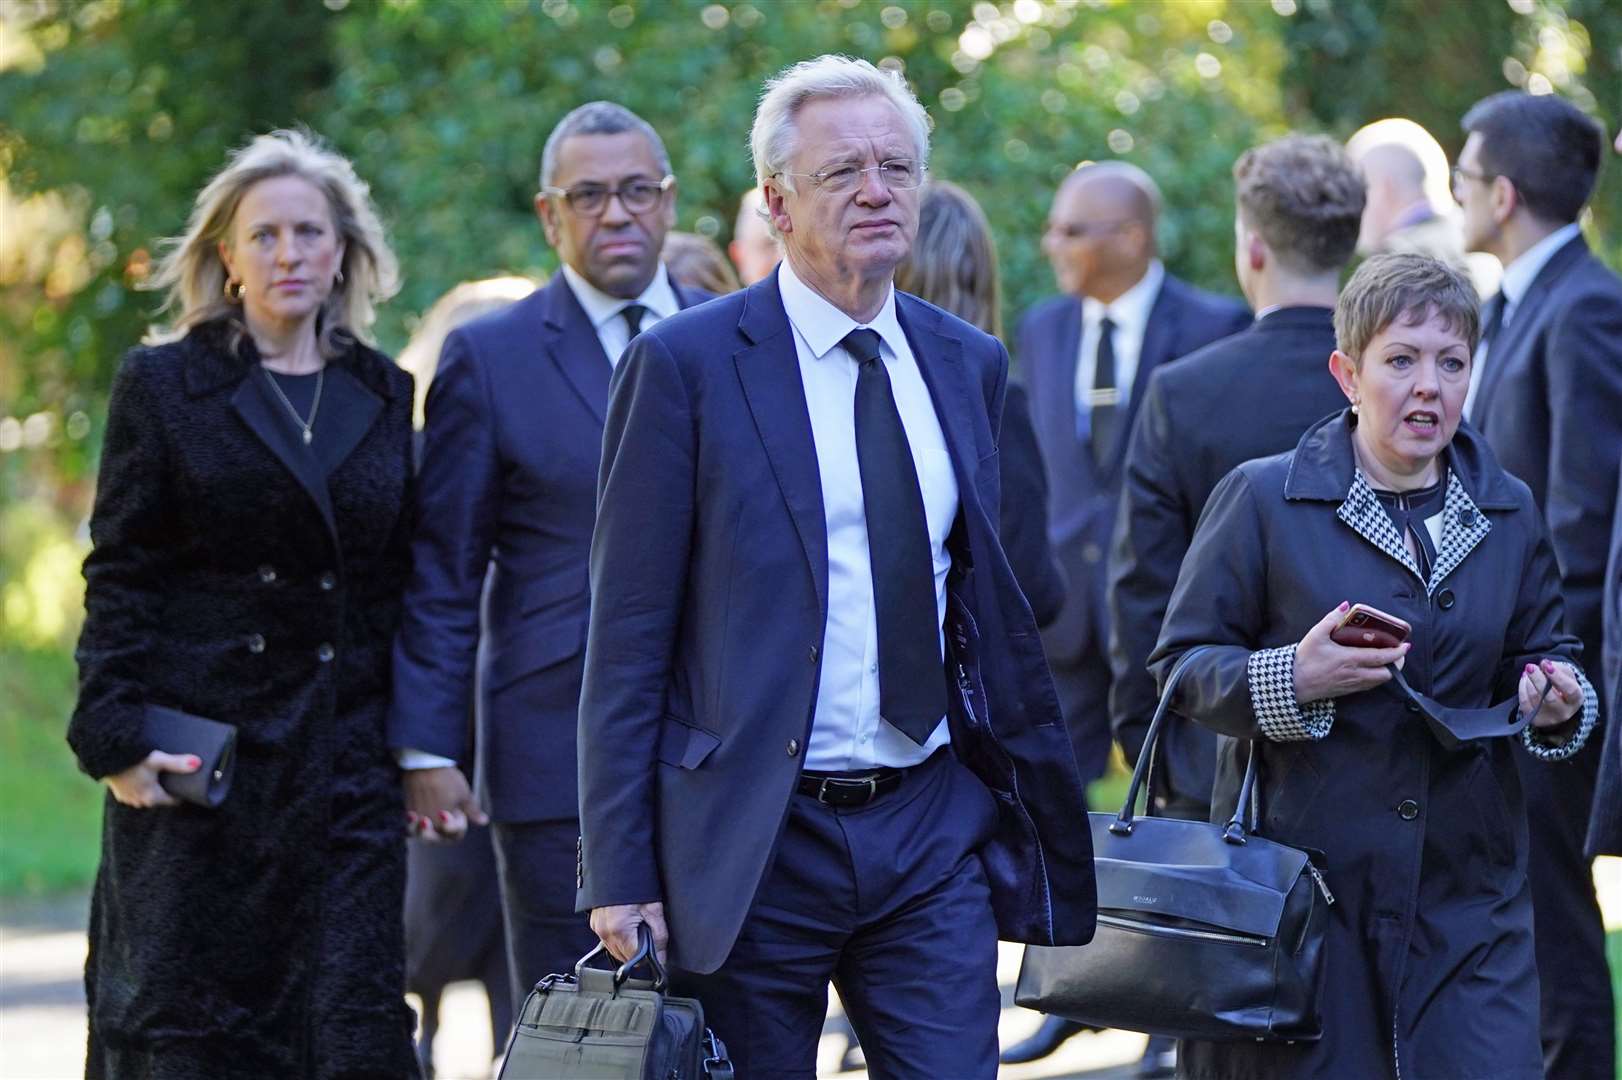 Former Cabinet minister David Davies (centre) arrives for the funeral of James Brokenshire in Bexley, south-east London (Stefan Rousseau/PA)